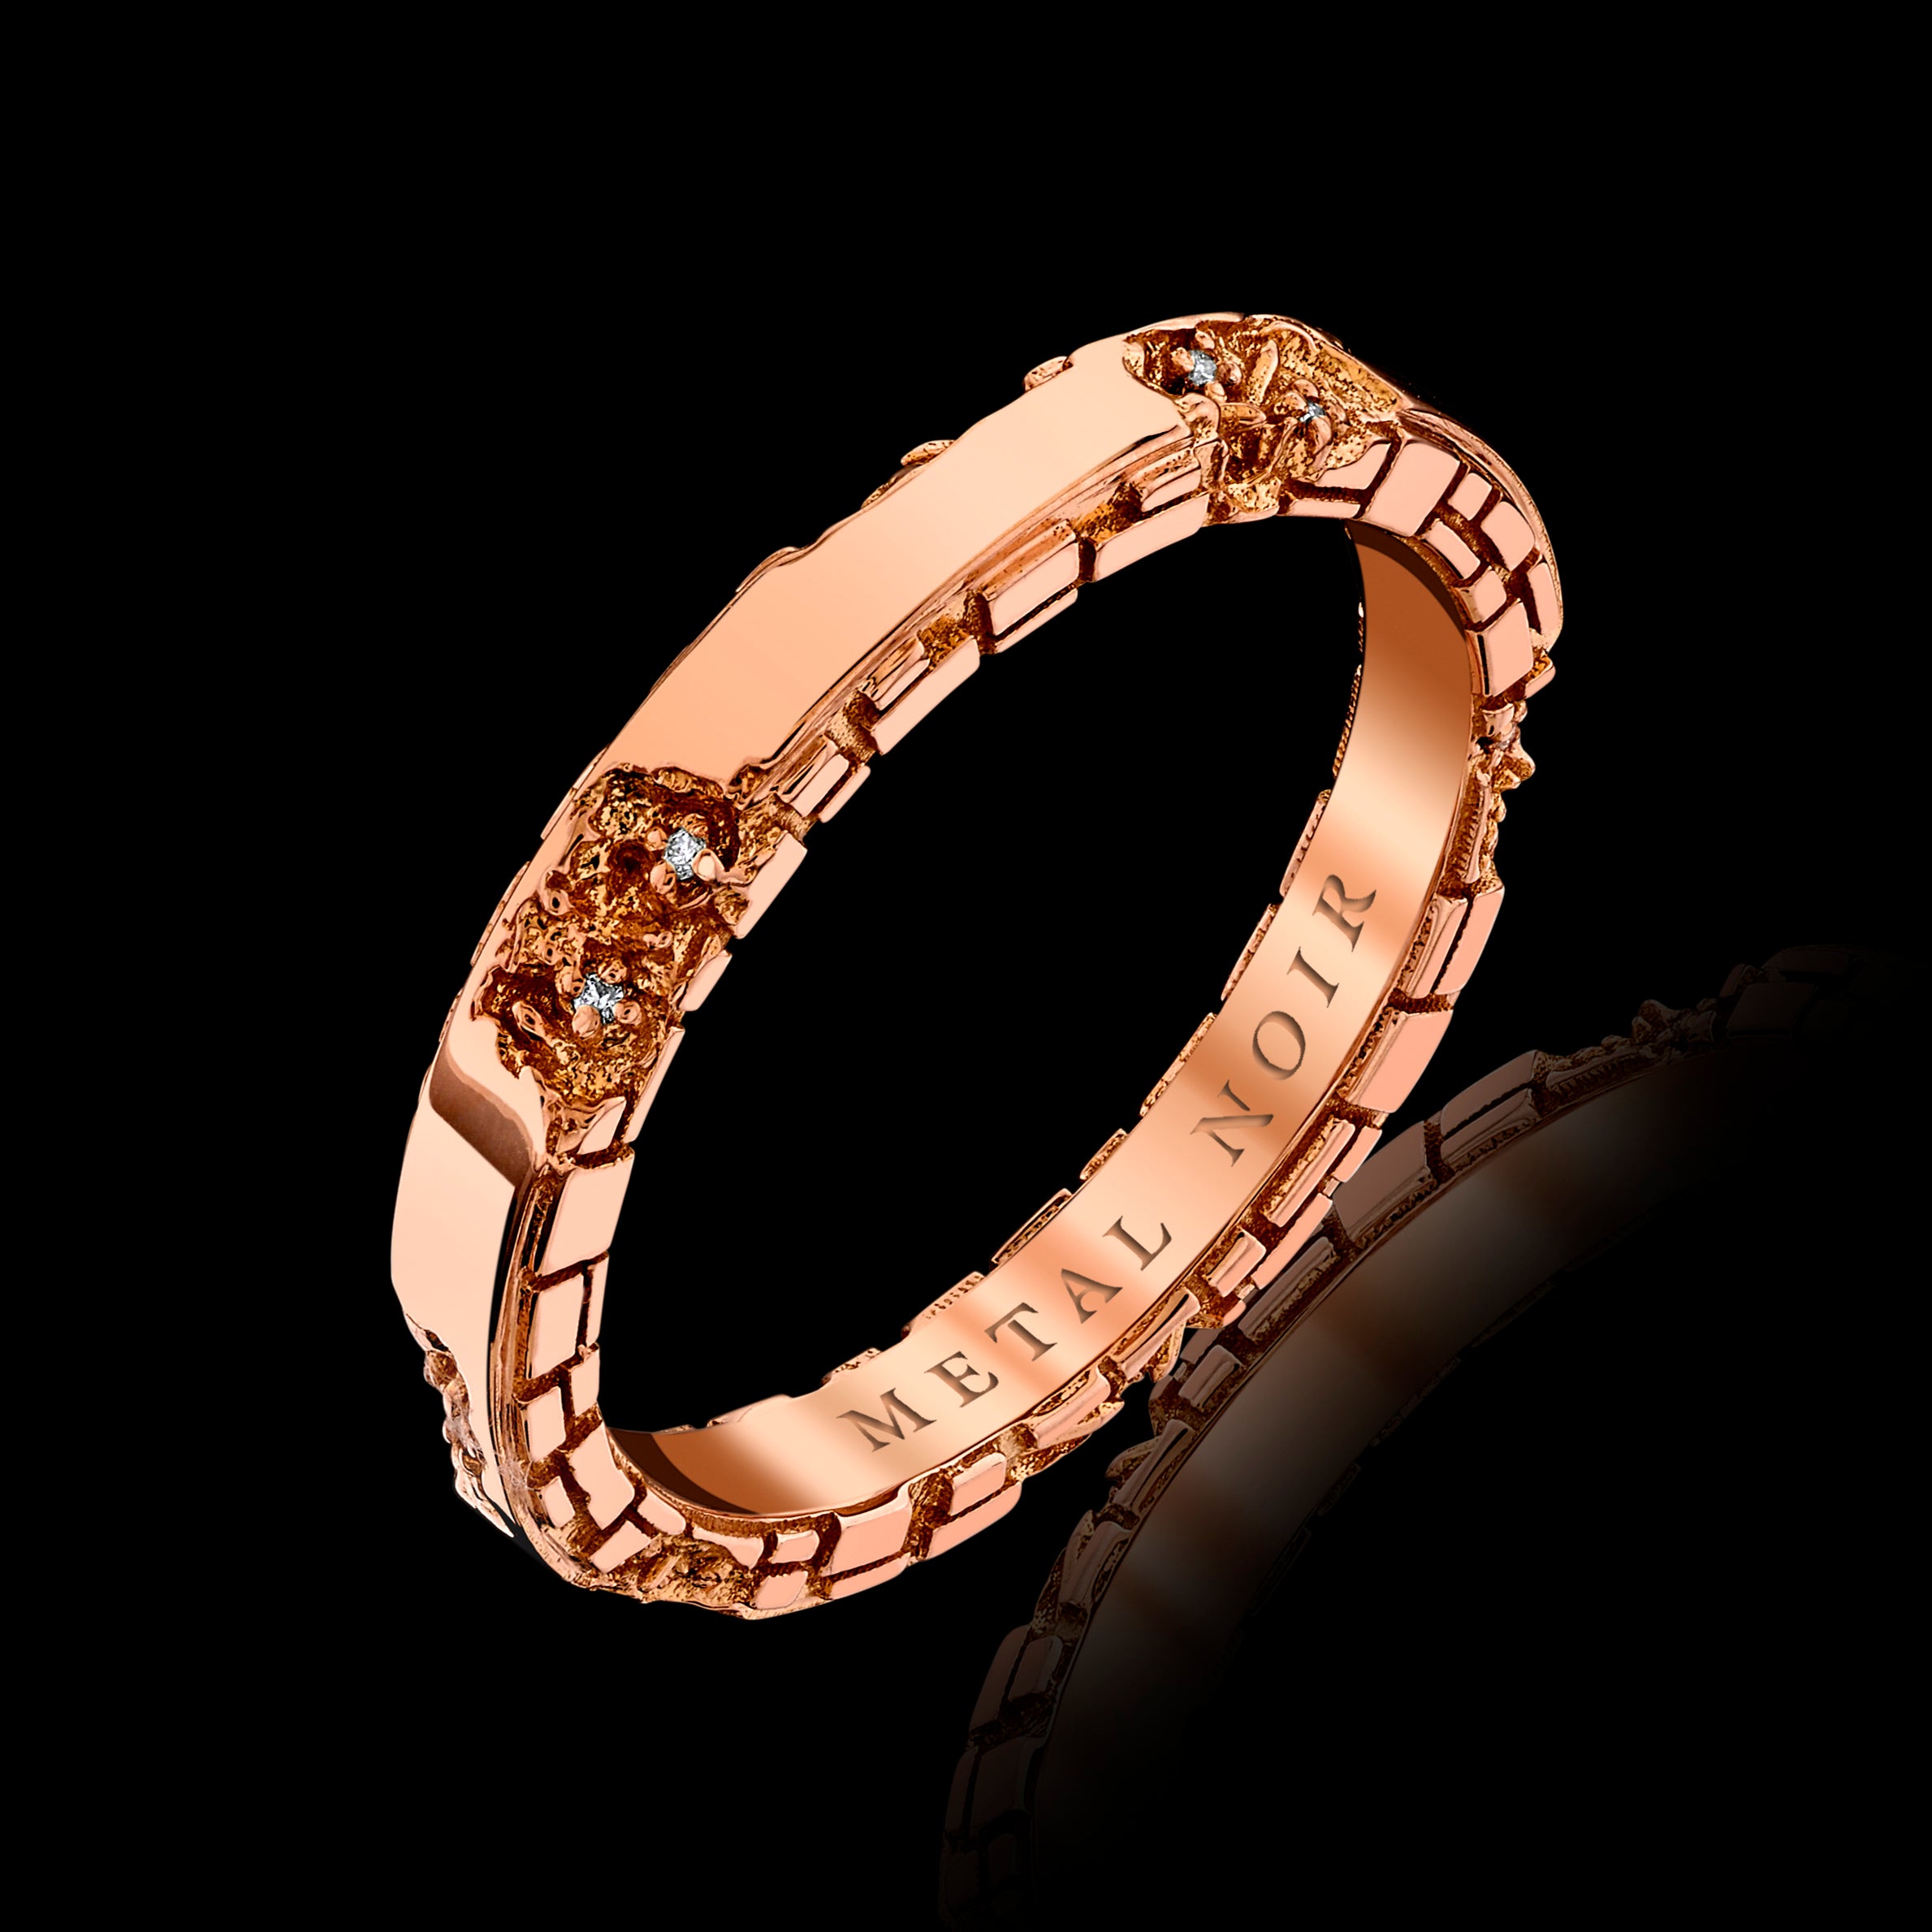 ‘Eroded Architecture’ ULTRATHIN Ring in solid 18k rose gold • Edition of 50